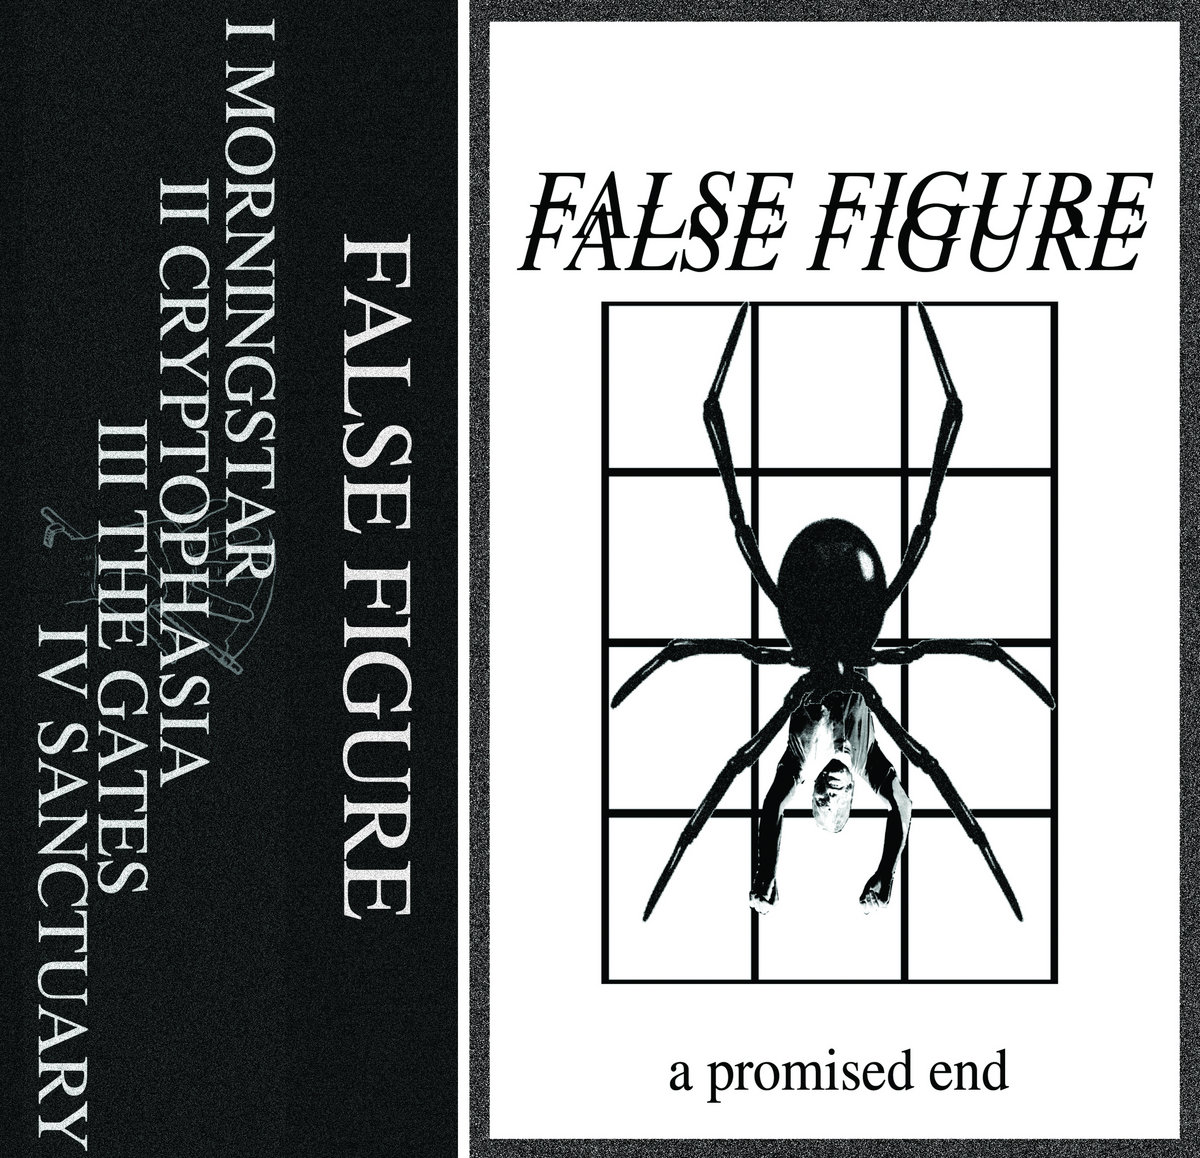 False Figure; A Promised End. This is unexpected. Old school goth from 1983, like Southern Death Cult or Artery. I can almost smell the burnt hairspray from crimping it. I was a teenage goth so I'm bound like this, but I'm startled anyone sounds this way in the 21st century.